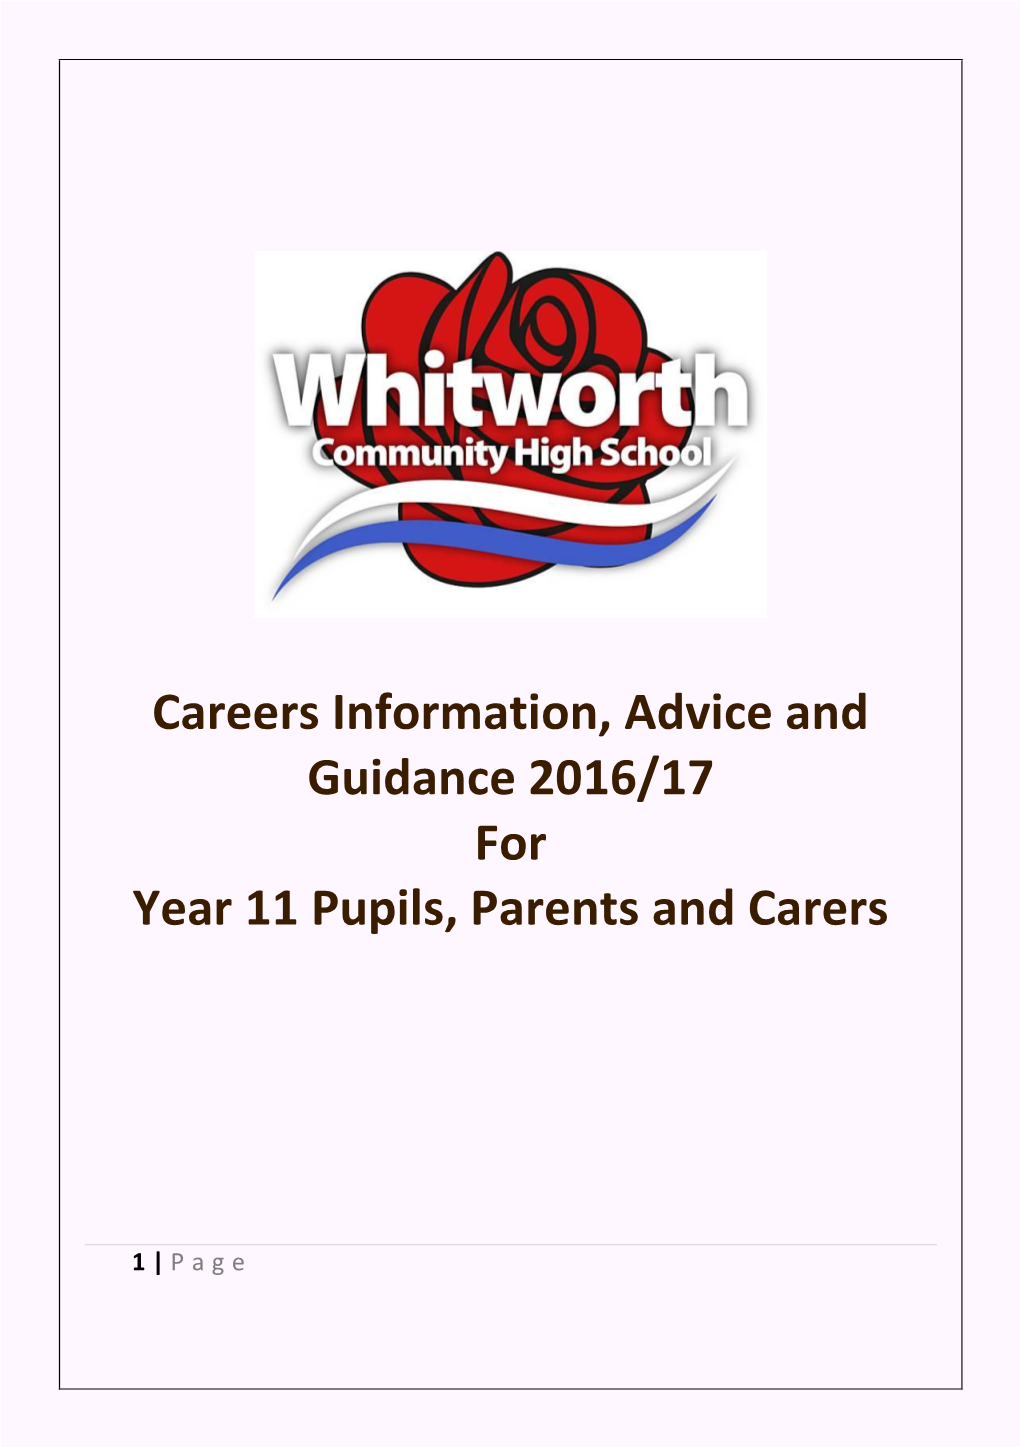 Careers Information, Advice and Guidance 2016/17 for Year 11 Pupils, Parents and Carers